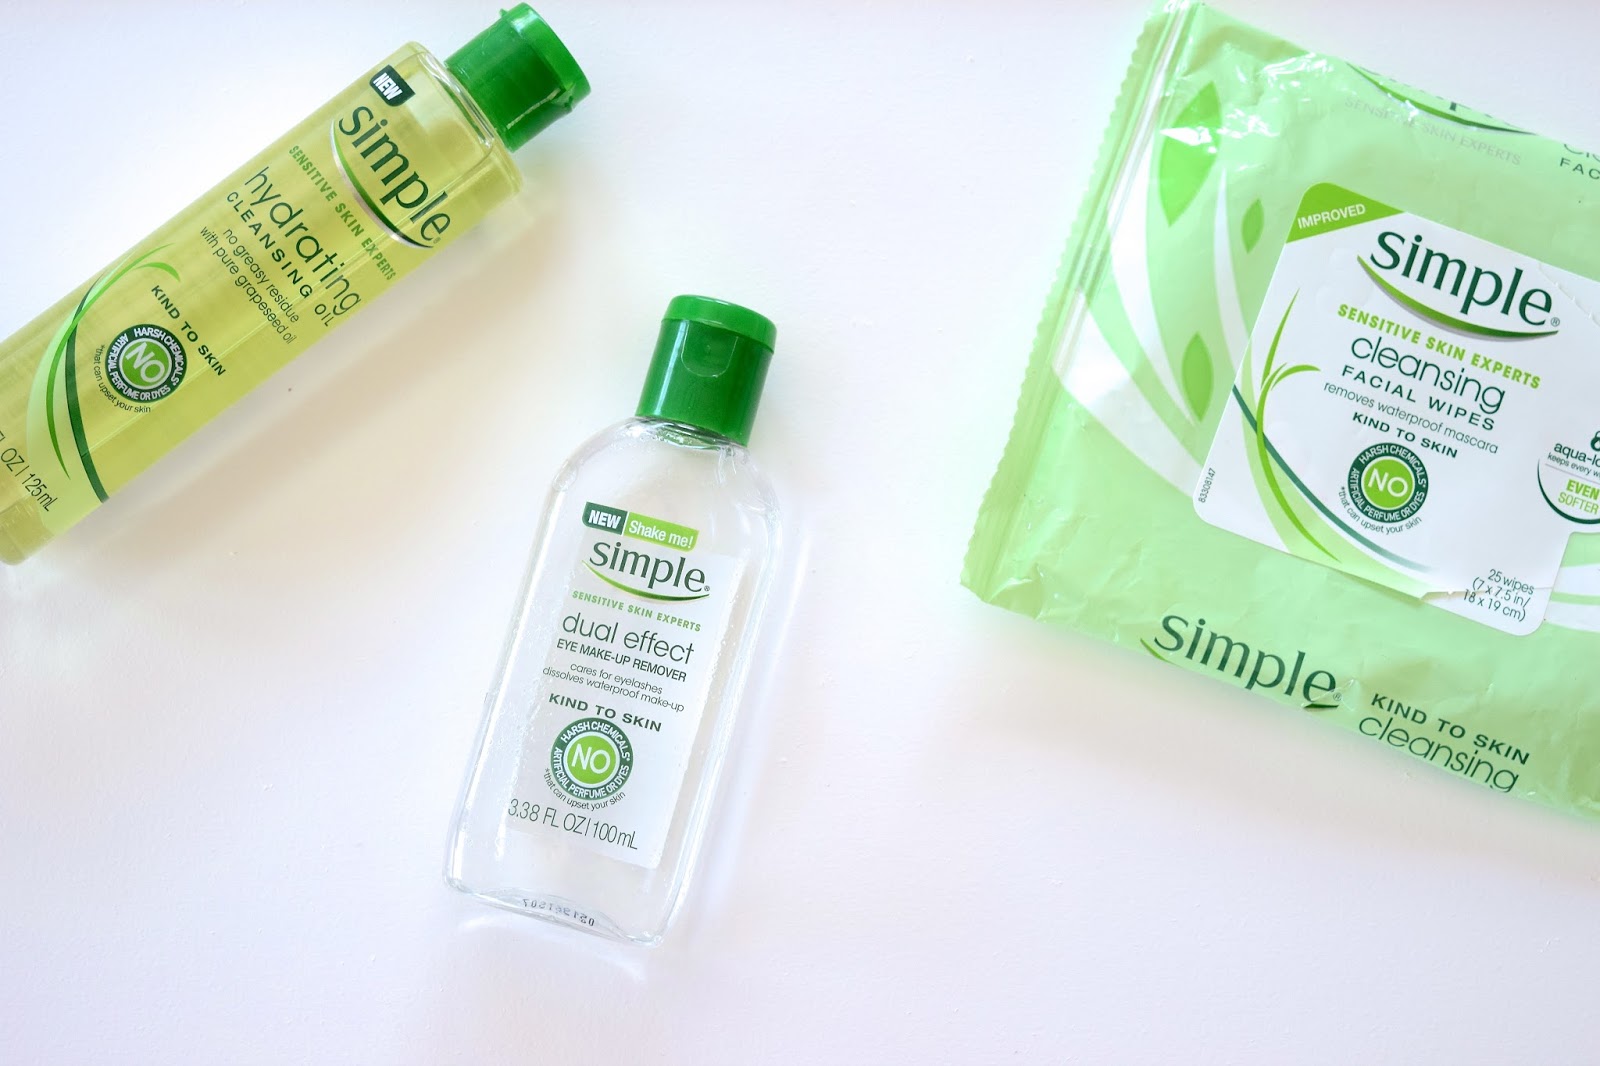 simple dual effect eye makeup remover review